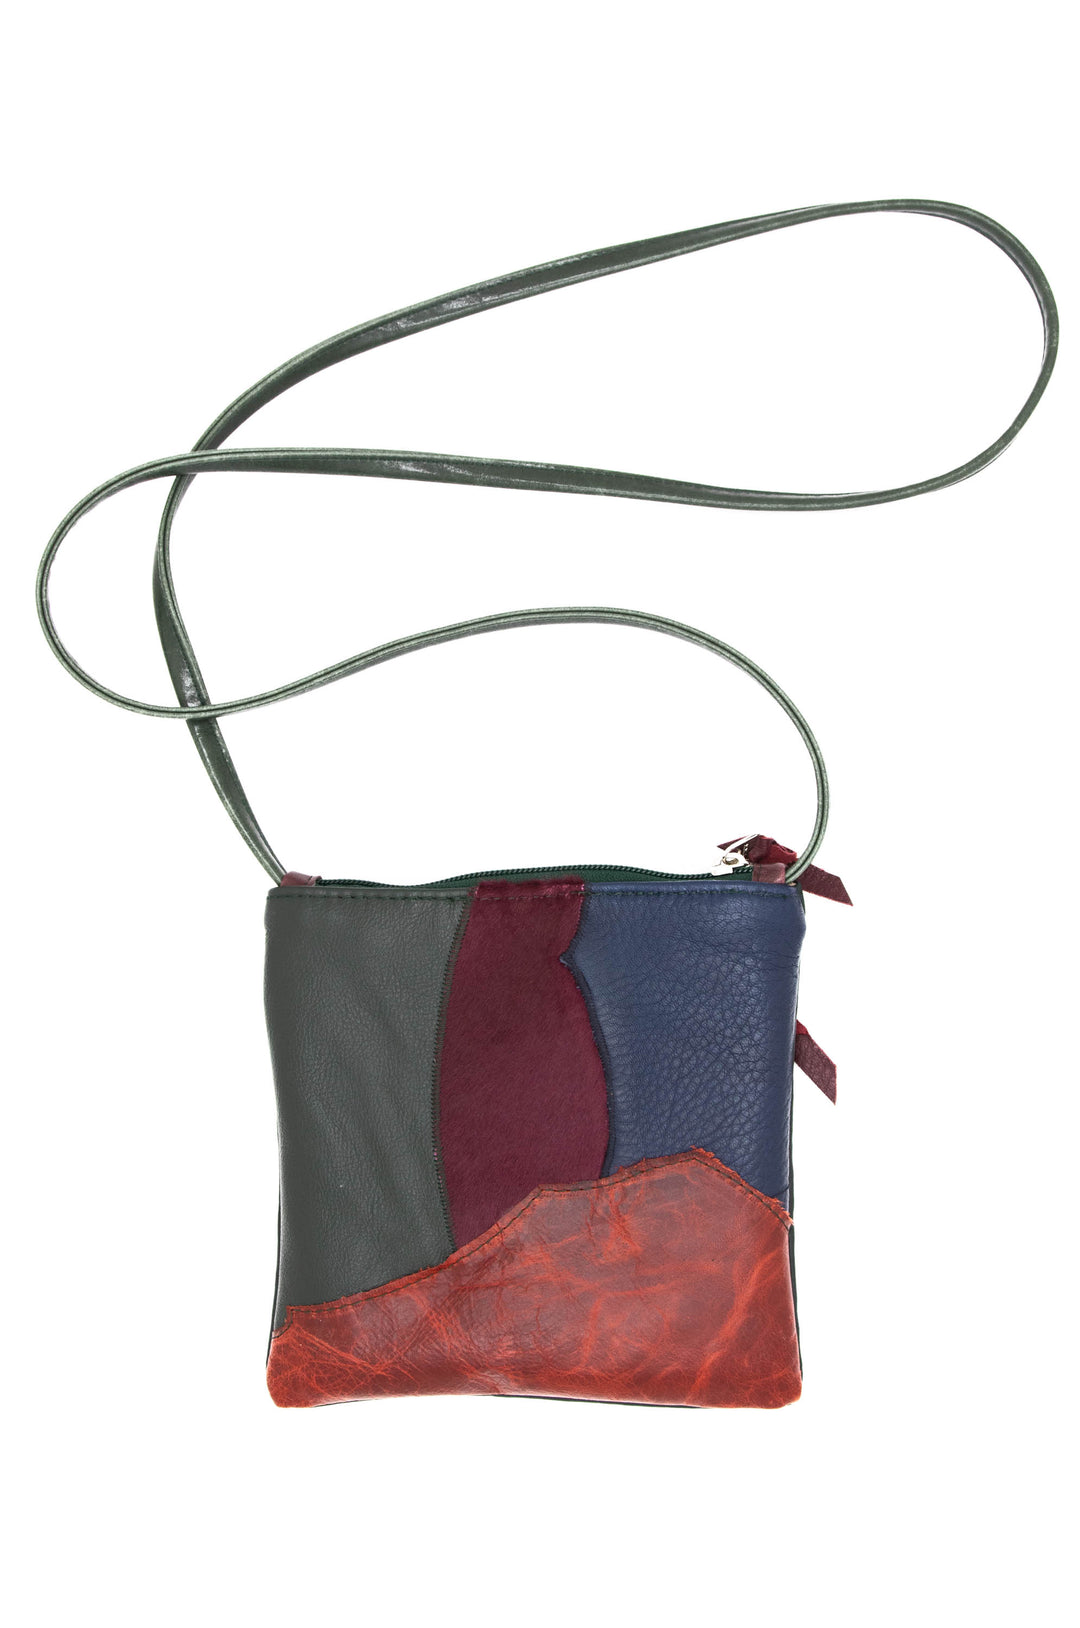 Cha Cha Small Crossbody Bag - Wine, Navy Hunter Patchwork - One of a Kind